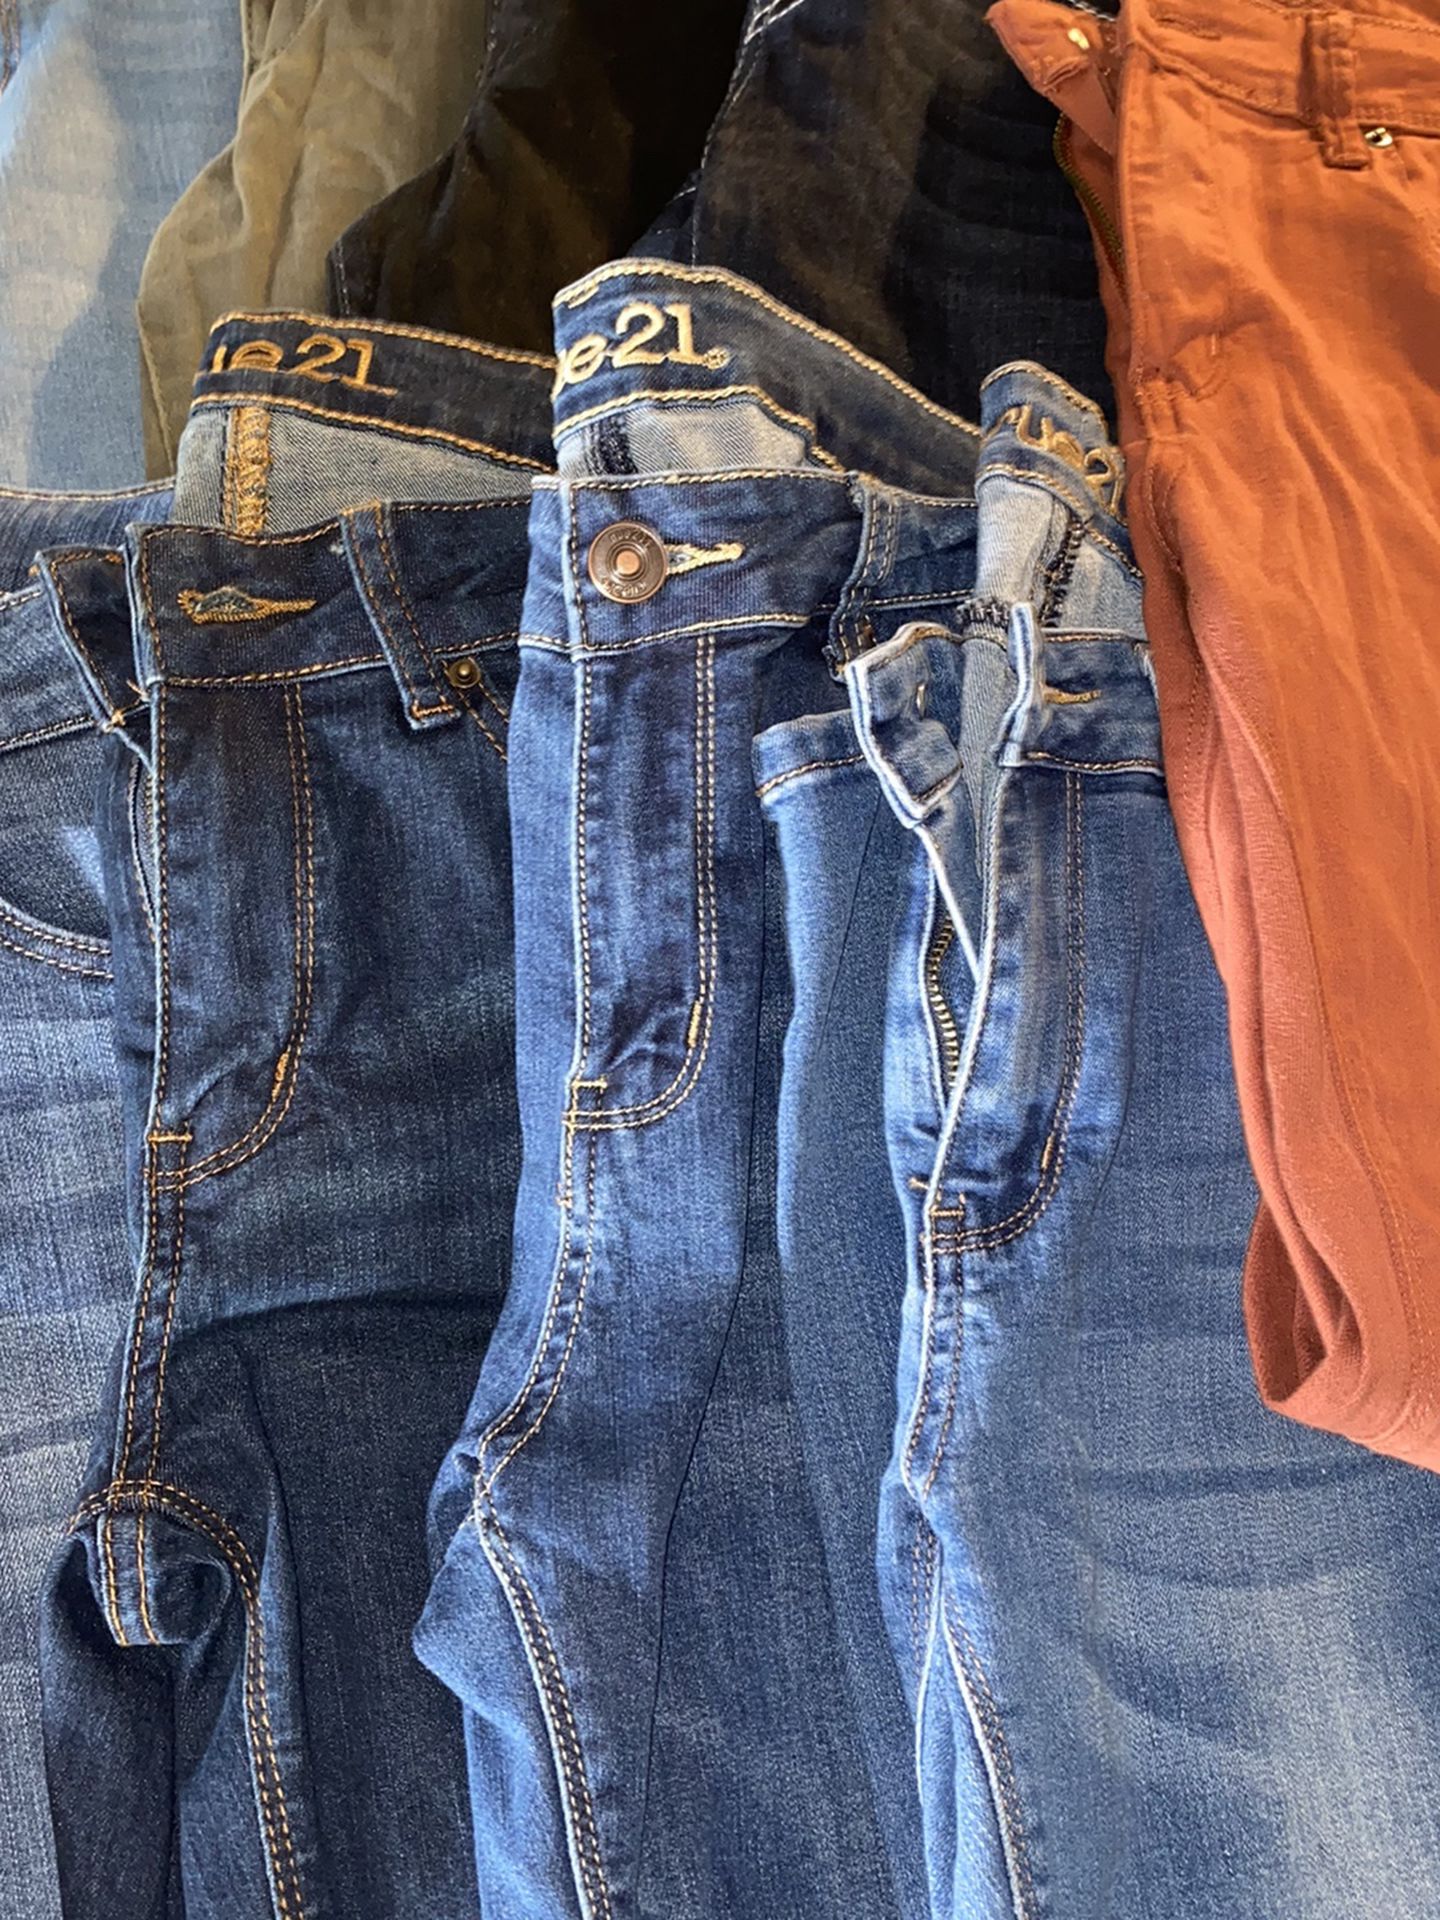 LOT Of jeans